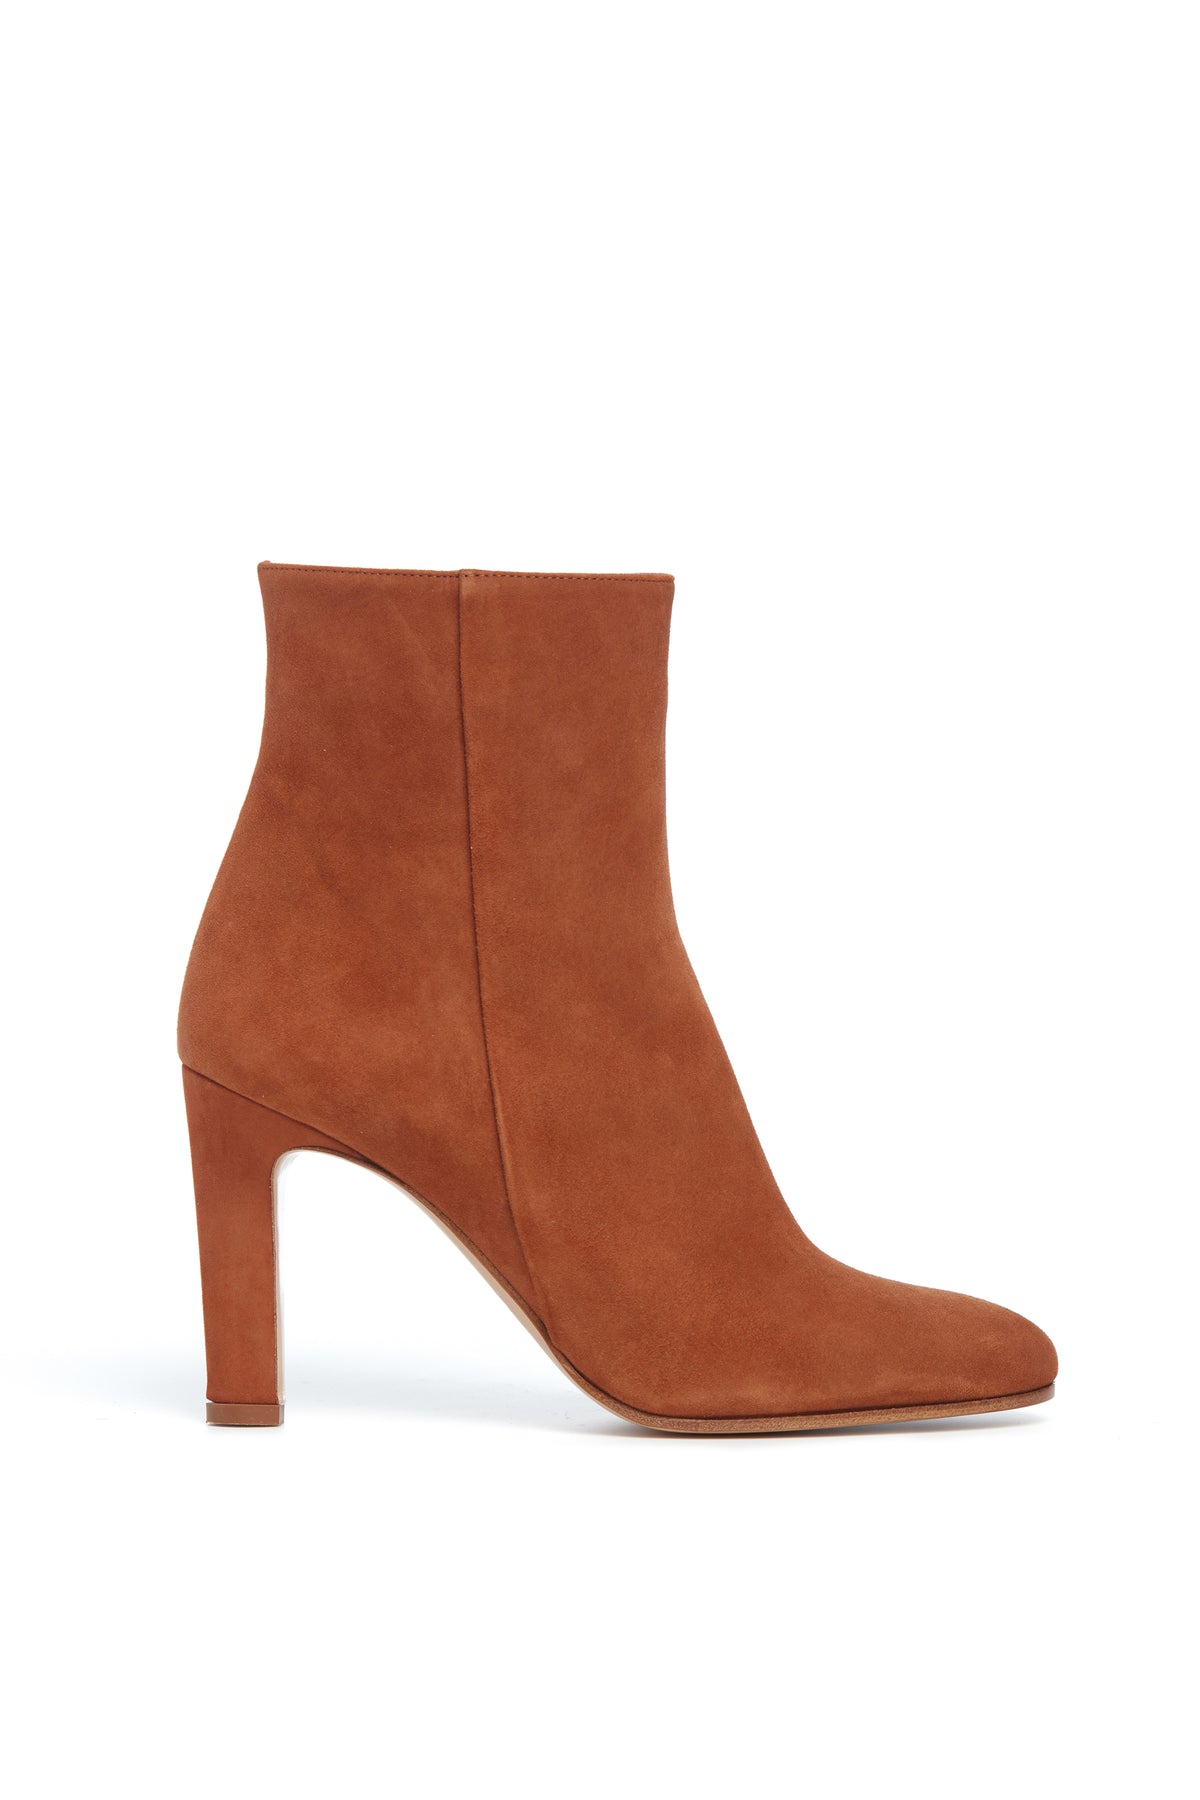 Lila Ankle Boot in Cognac Suede